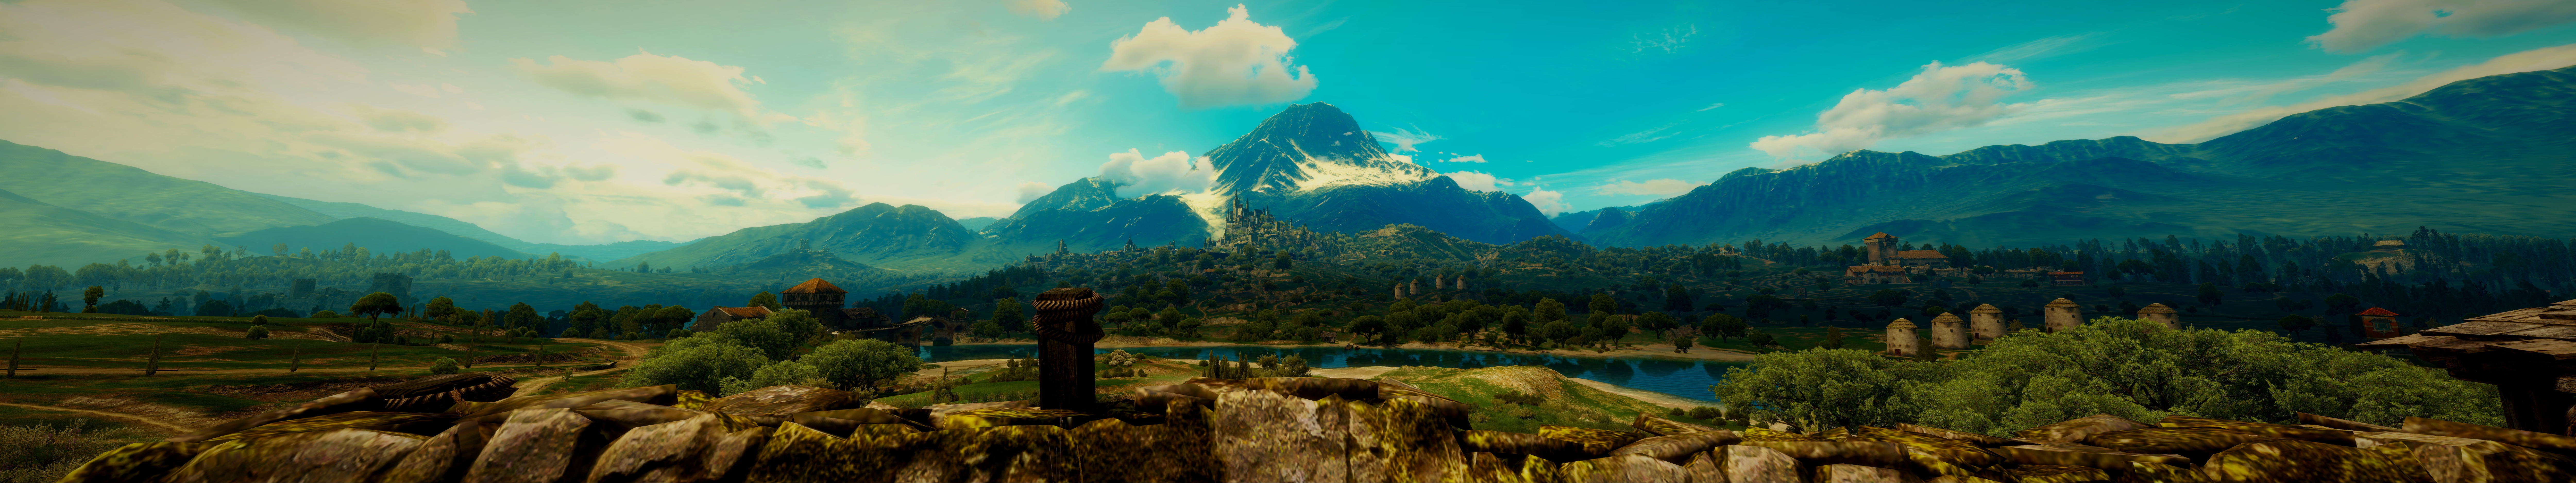 General 11520x2160 The Witcher The Witcher 3: Wild Hunt Nvidia Ansel The Witcher 3: Wild Hunt - Blood and Wine video game landscape video games PC gaming RPG